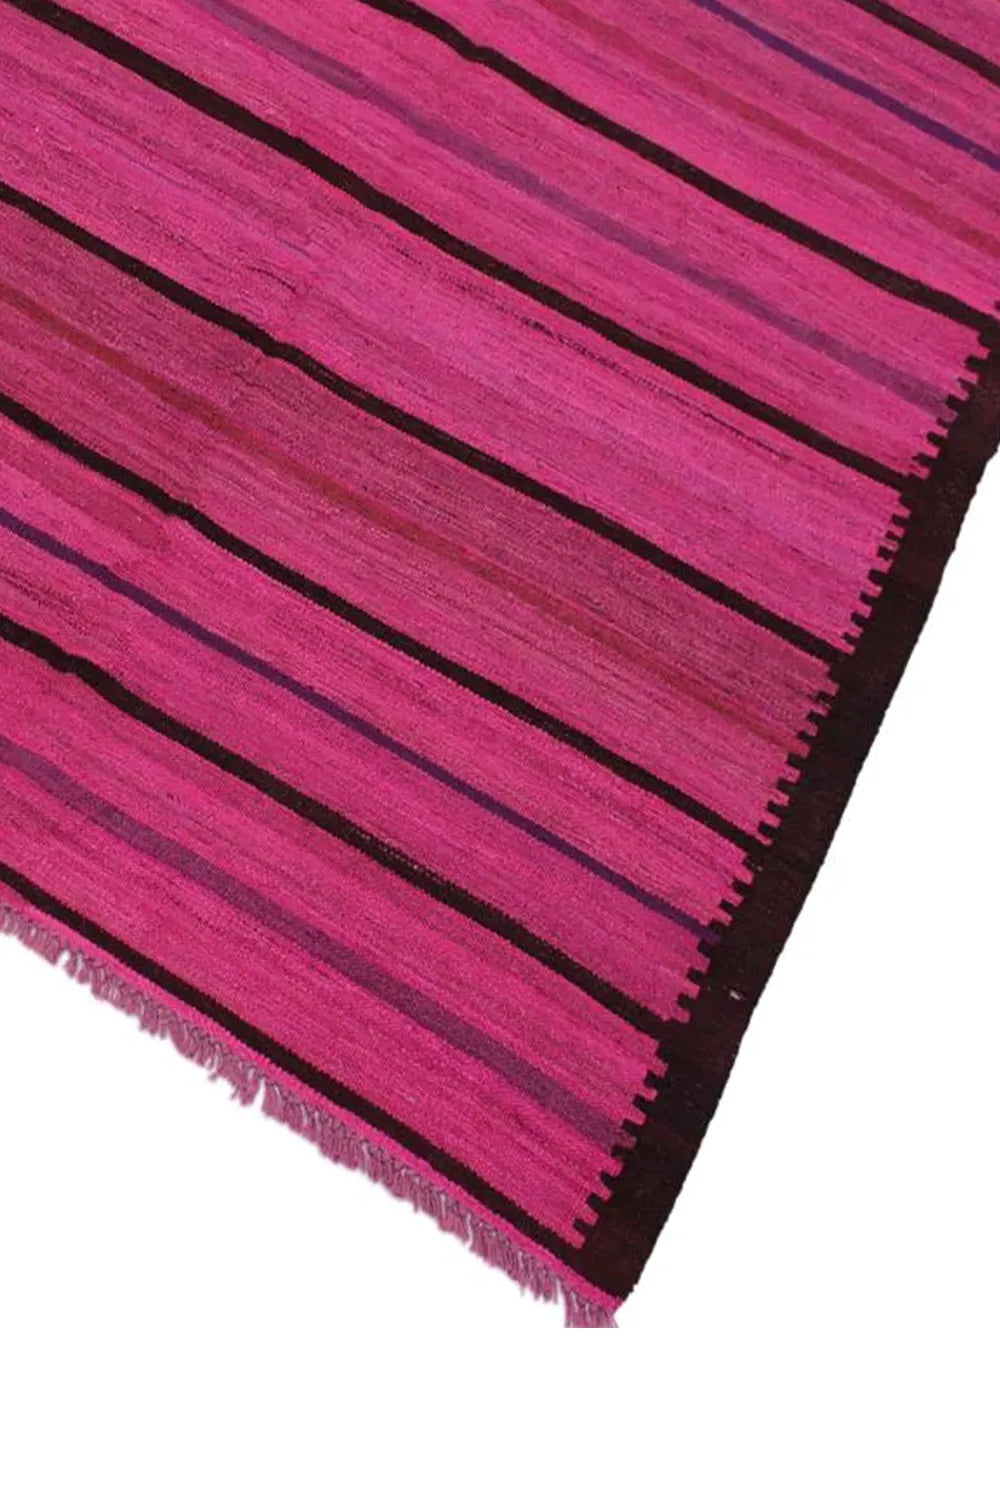 Multicolor Nursery Kilim Rug in Pink, Handwoven and Soft in 5x7 Size